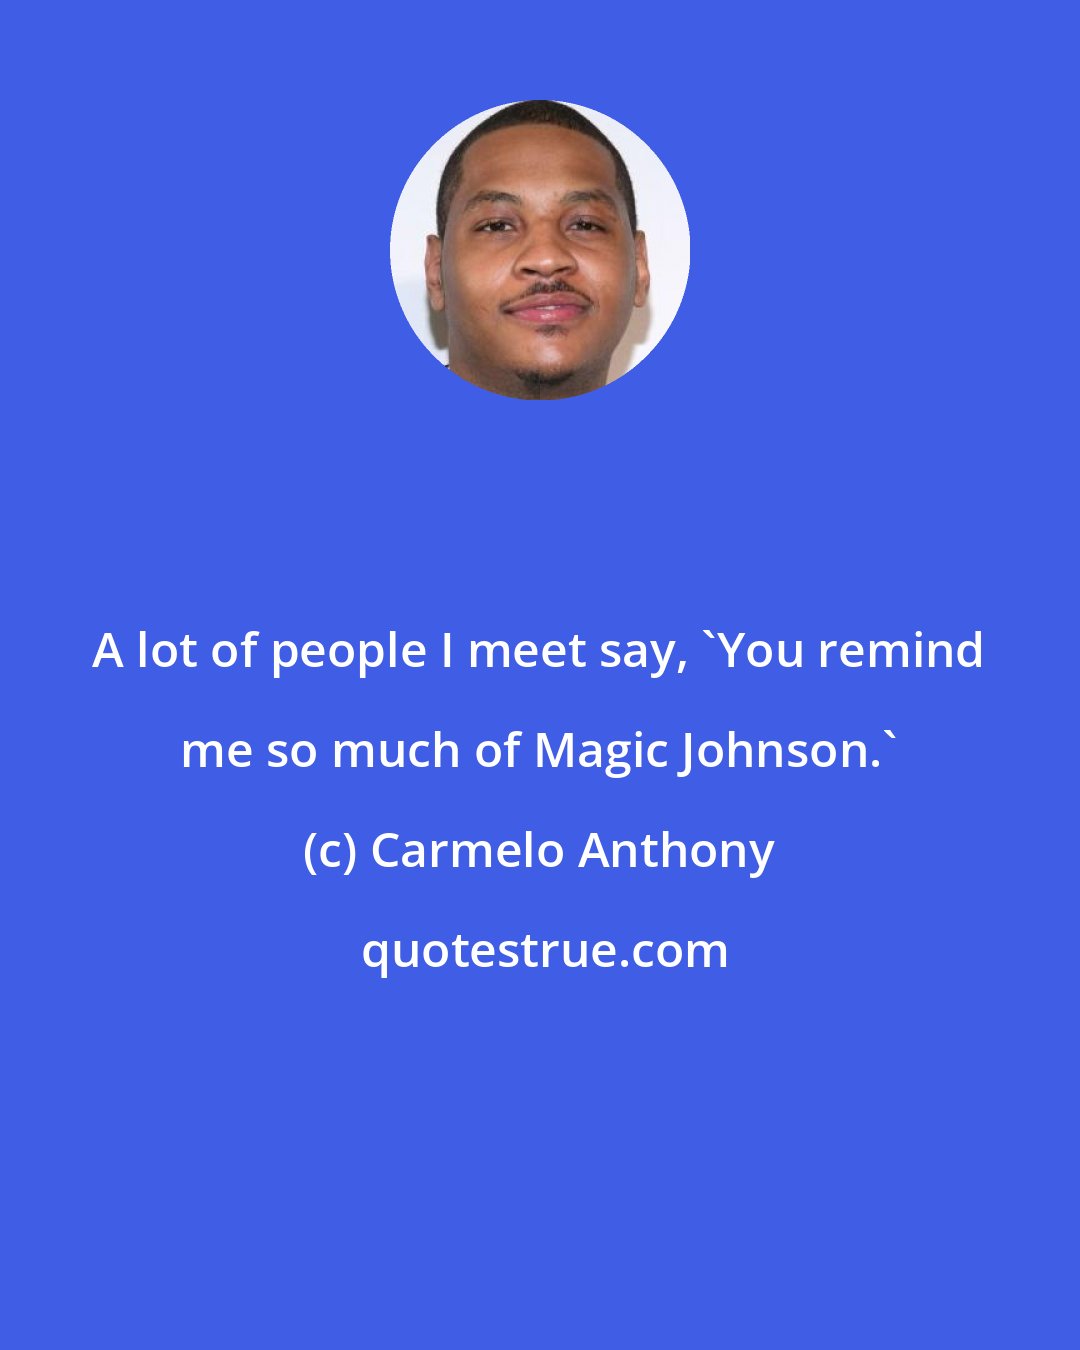 Carmelo Anthony: A lot of people I meet say, 'You remind me so much of Magic Johnson.'